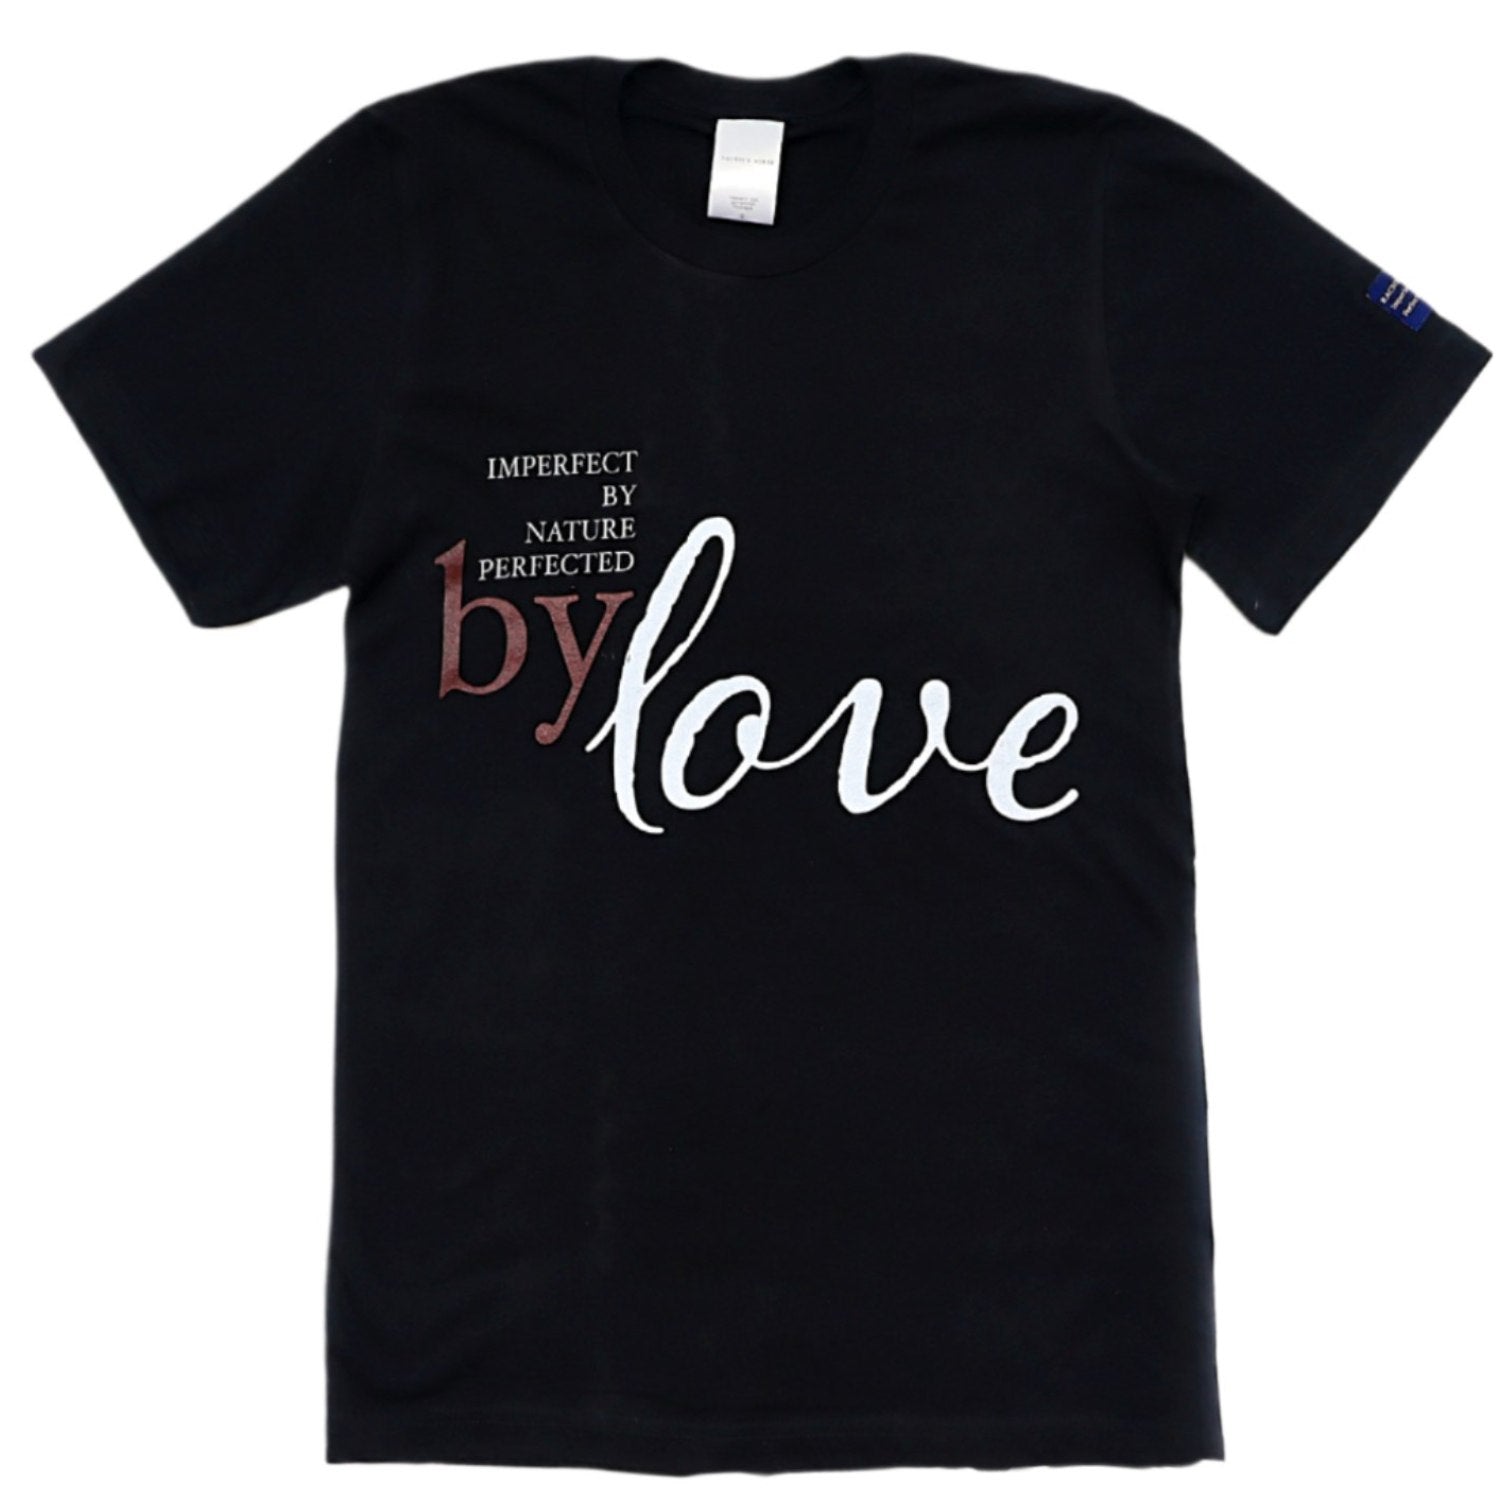 Short Sleeve Perfected by Love Black Shirt